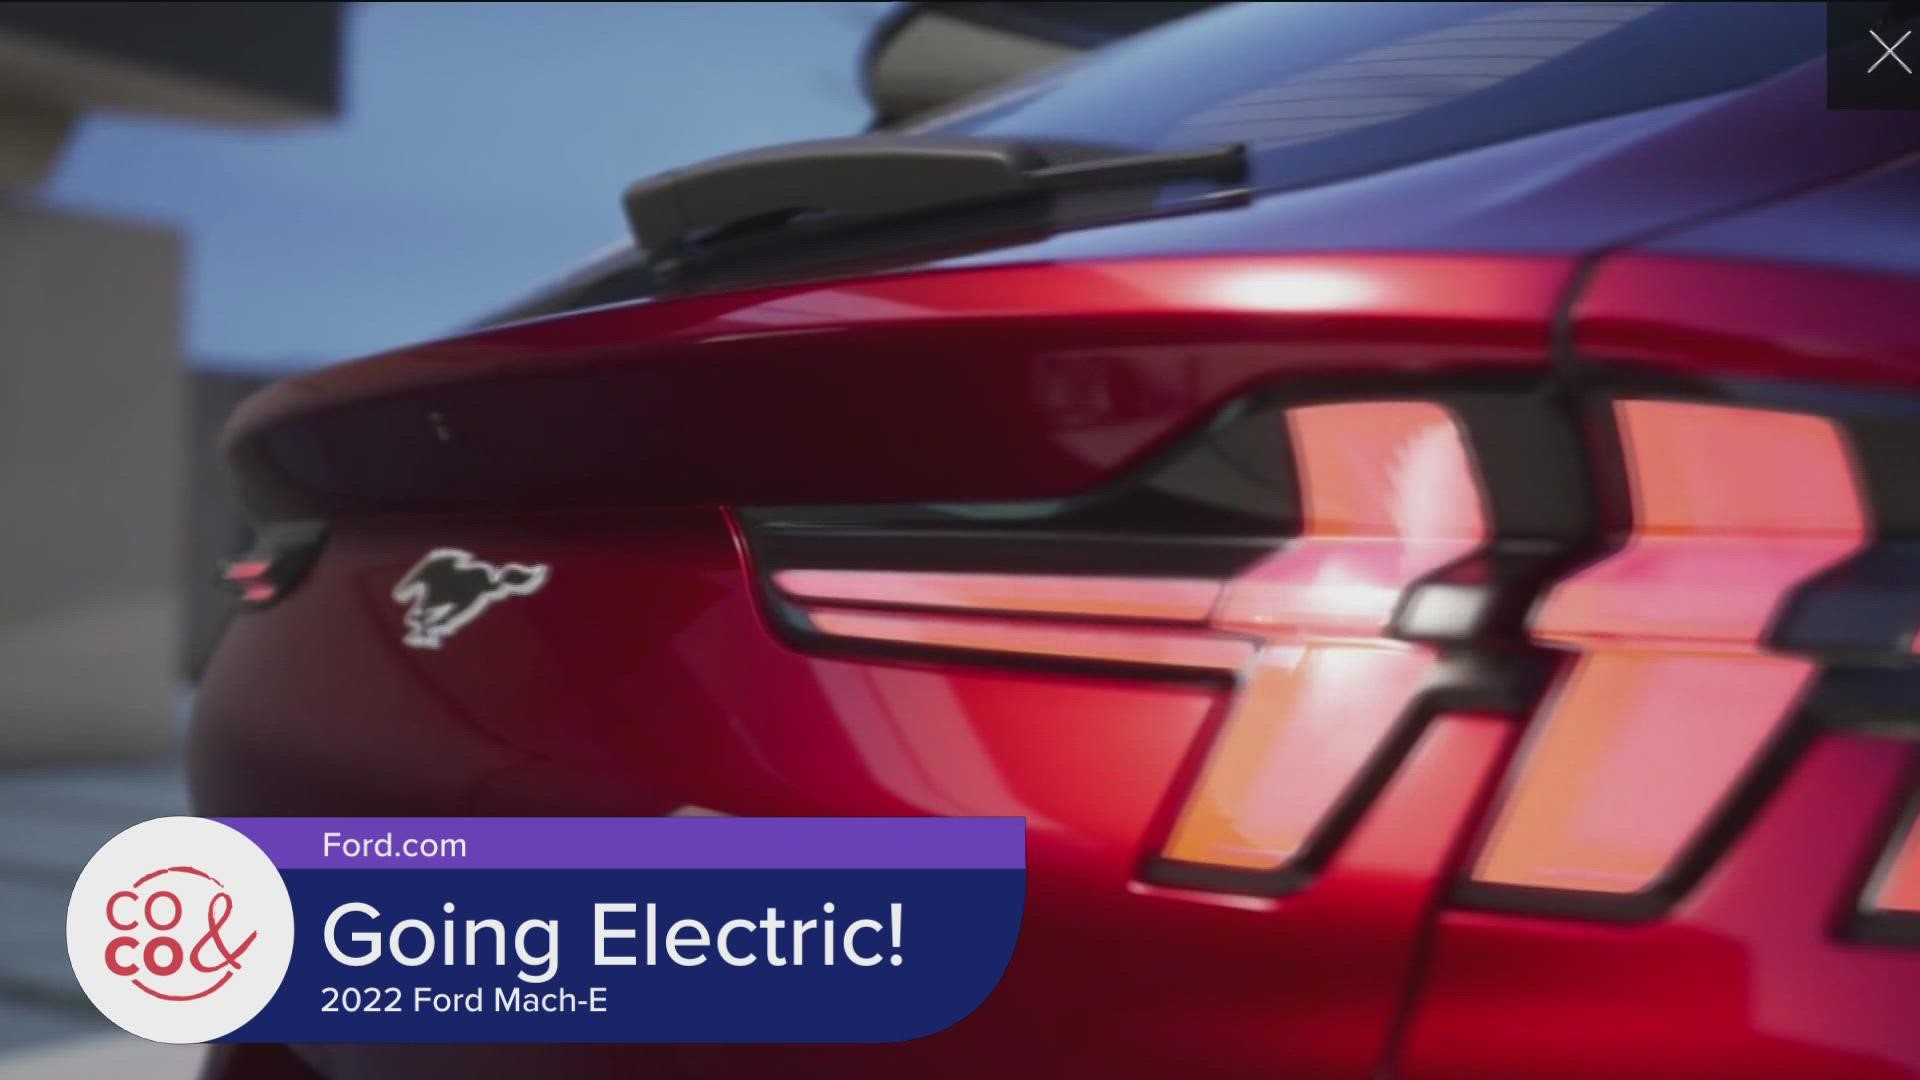 Learn more about the Mach-E at Ford.com.